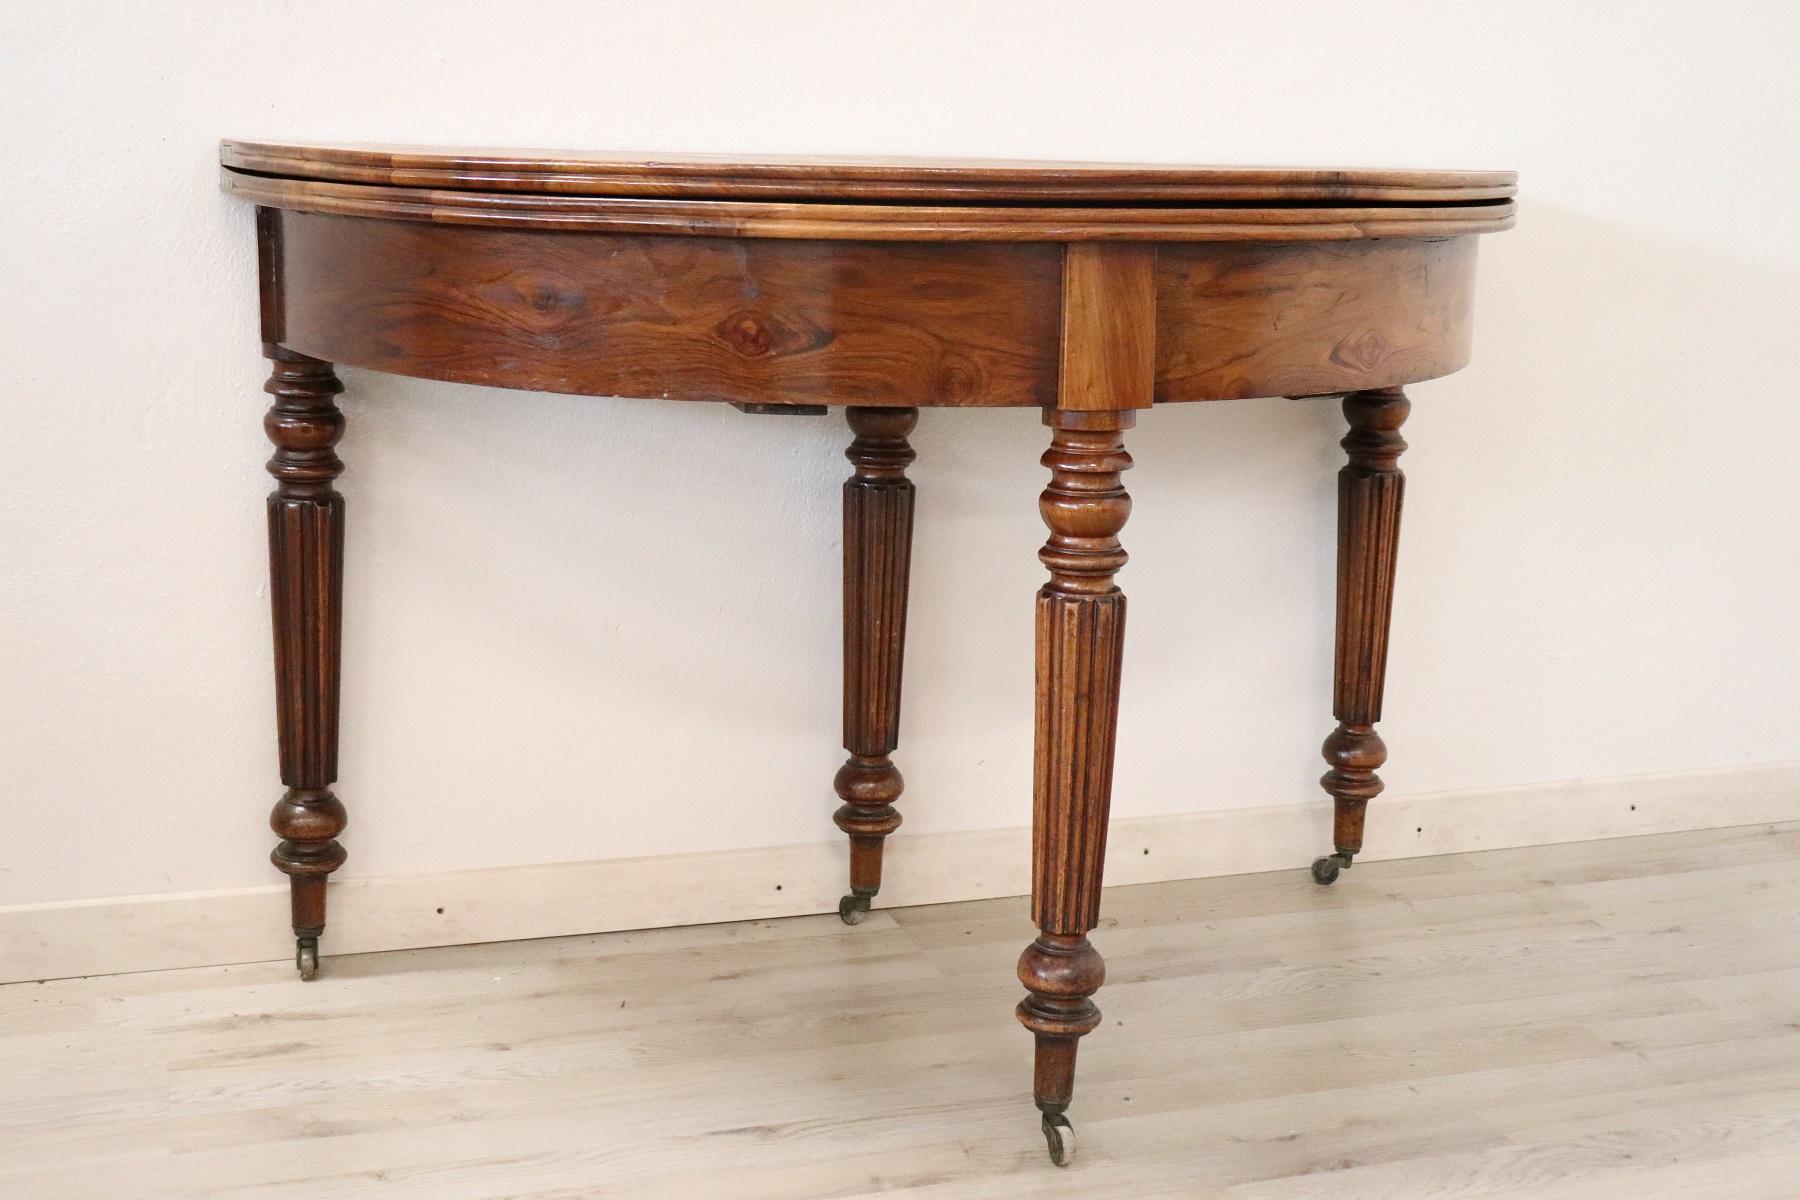 This beautiful solid walnut table when closed is an elegant wall console or demilune table. The table can be opened very easily and the table becomes a round dining table. Solid patina solid walnut wood. The legs are very binds turned. Under the